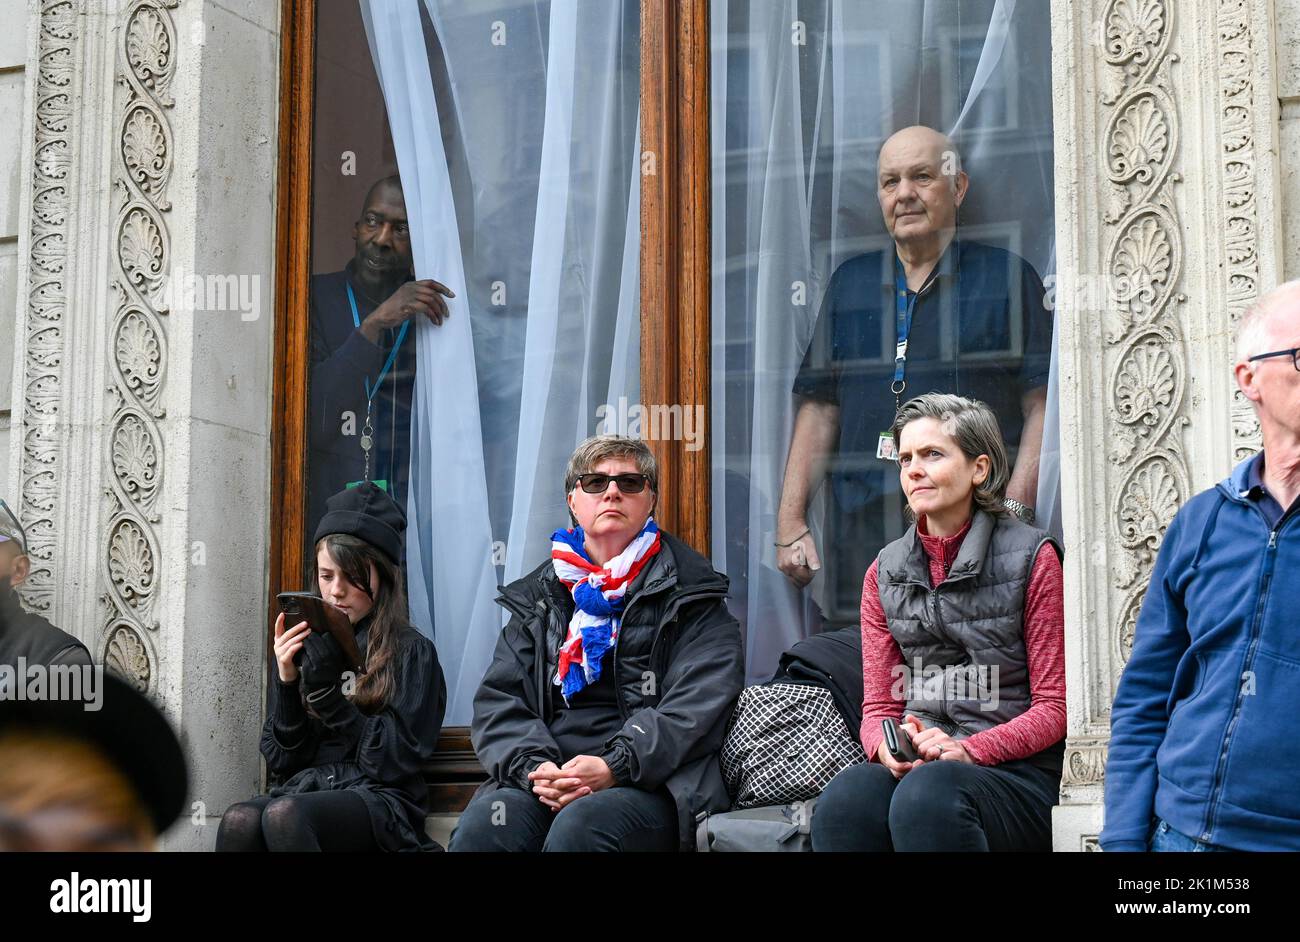 London, UK. 19th Sep, 2022. London UK 19th September 2022 - Workers peek out through windows as crowds in Whitehall watch the funeral procession of Queen Elizabeth II in London today: Credit Simon Dack / Alamy Live News Credit: Simon Dack News/Alamy Live News Stock Photo